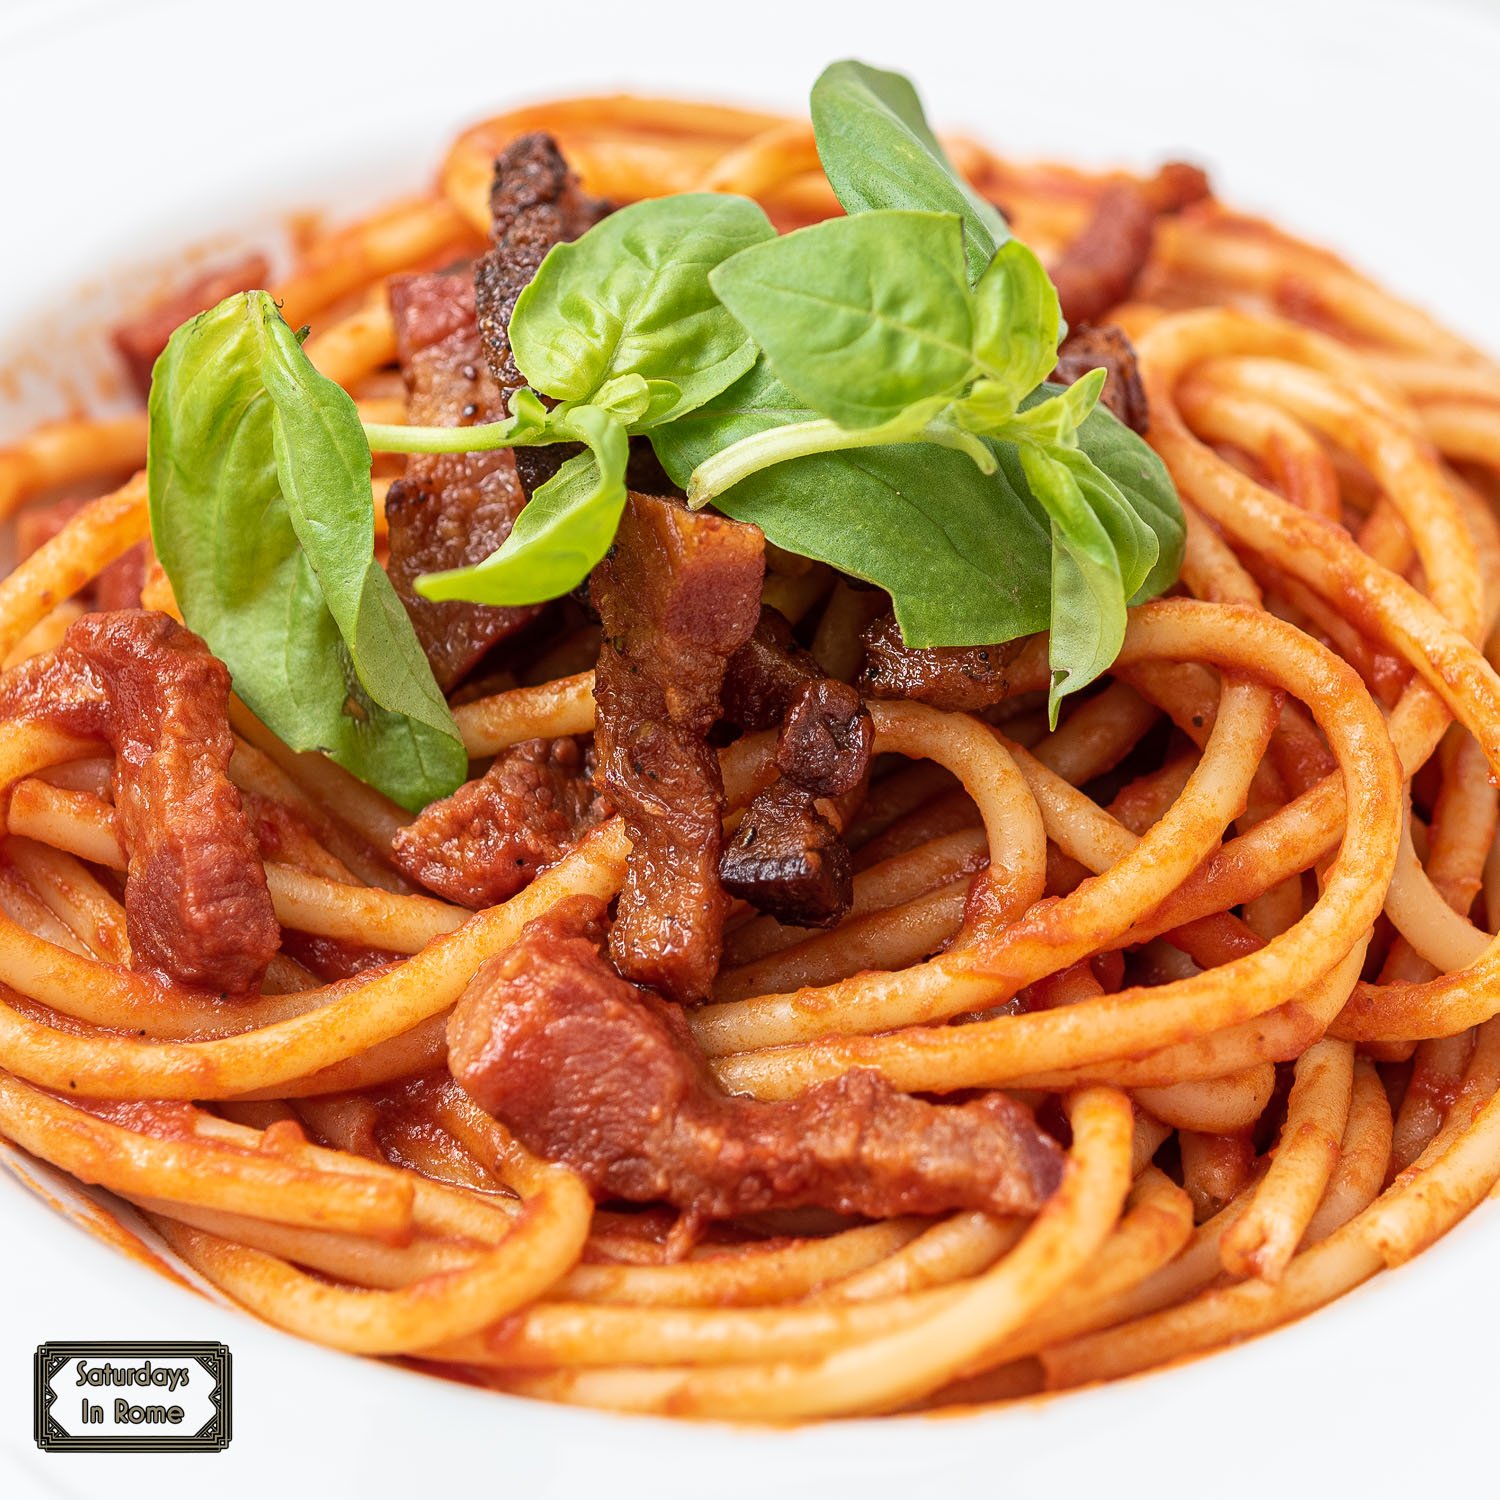 This Bucatini all'Amatriciana Recipe Is A Roman Classic